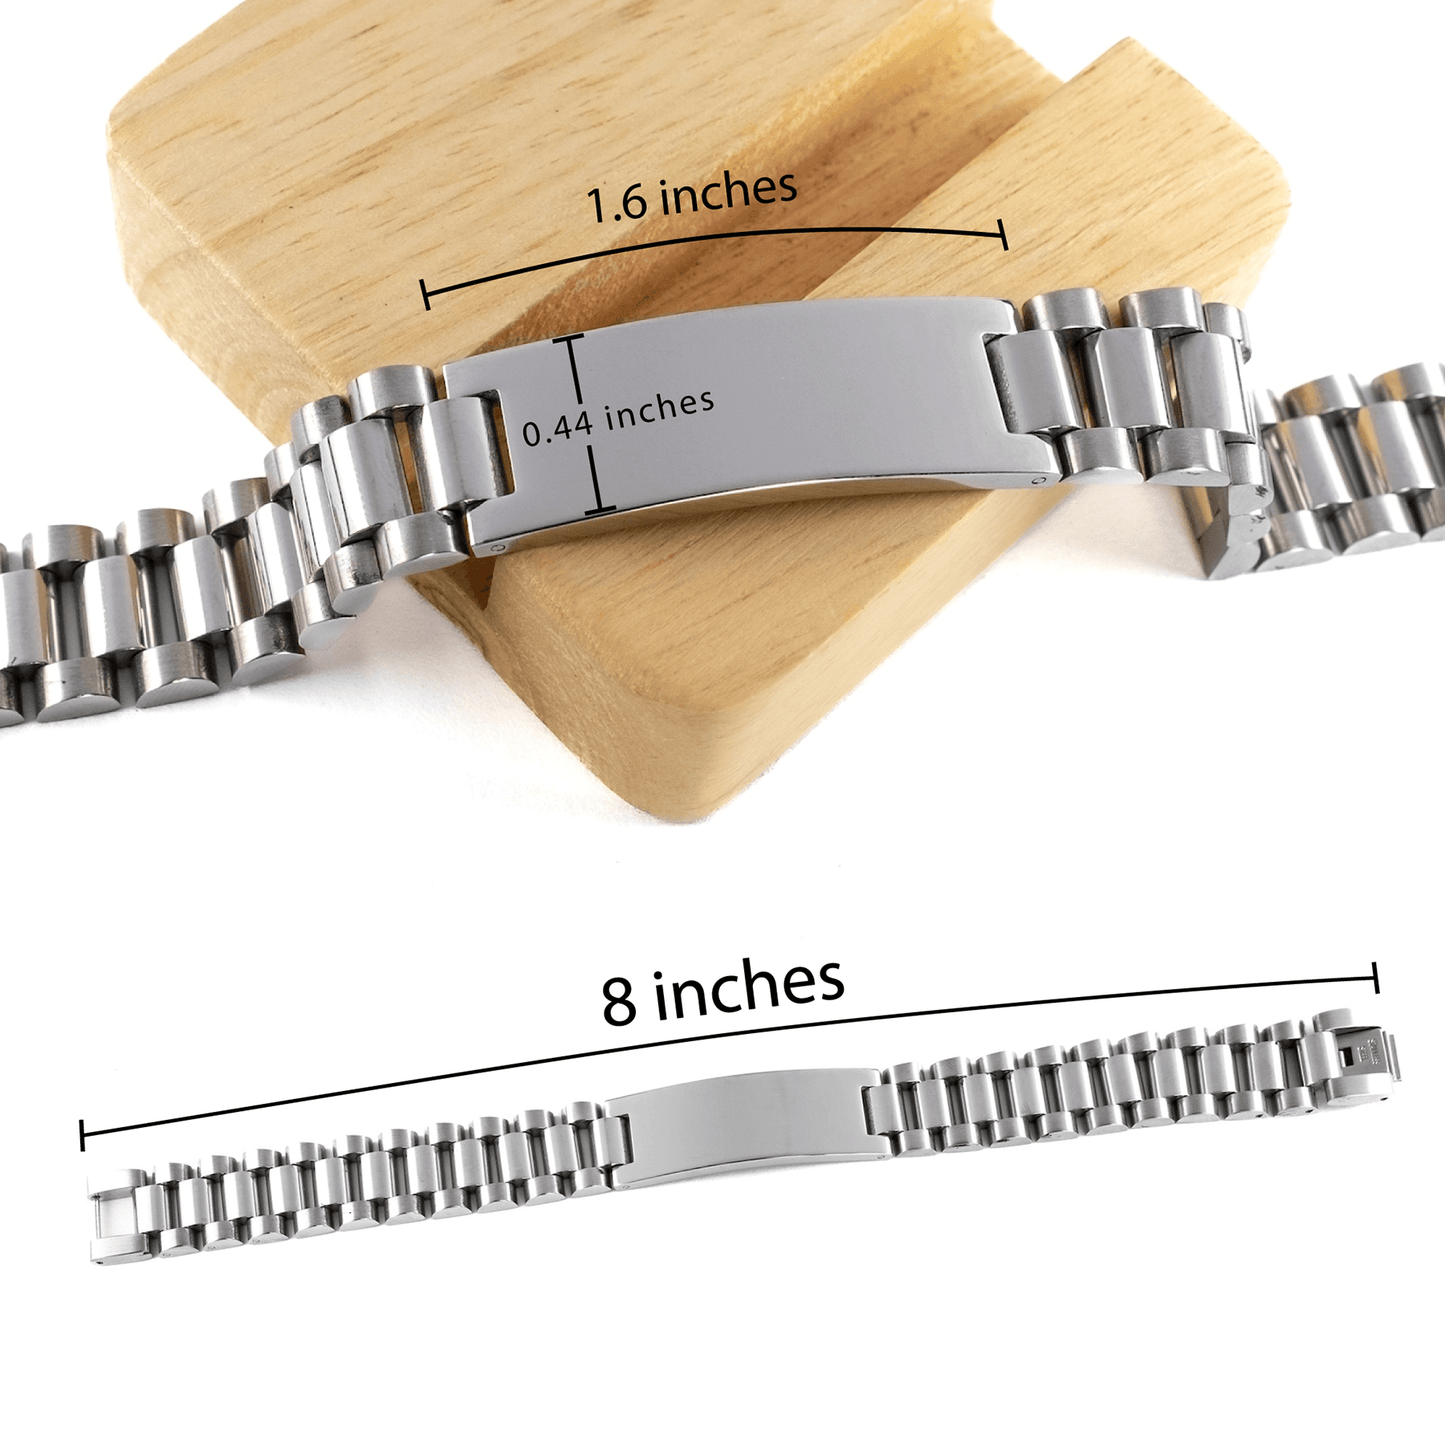 Welder Ladder Stainless Steel Engraved Bracelet - Thanks for being who you are - Birthday Christmas Jewelry Gifts Coworkers Colleague Boss - Mallard Moon Gift Shop